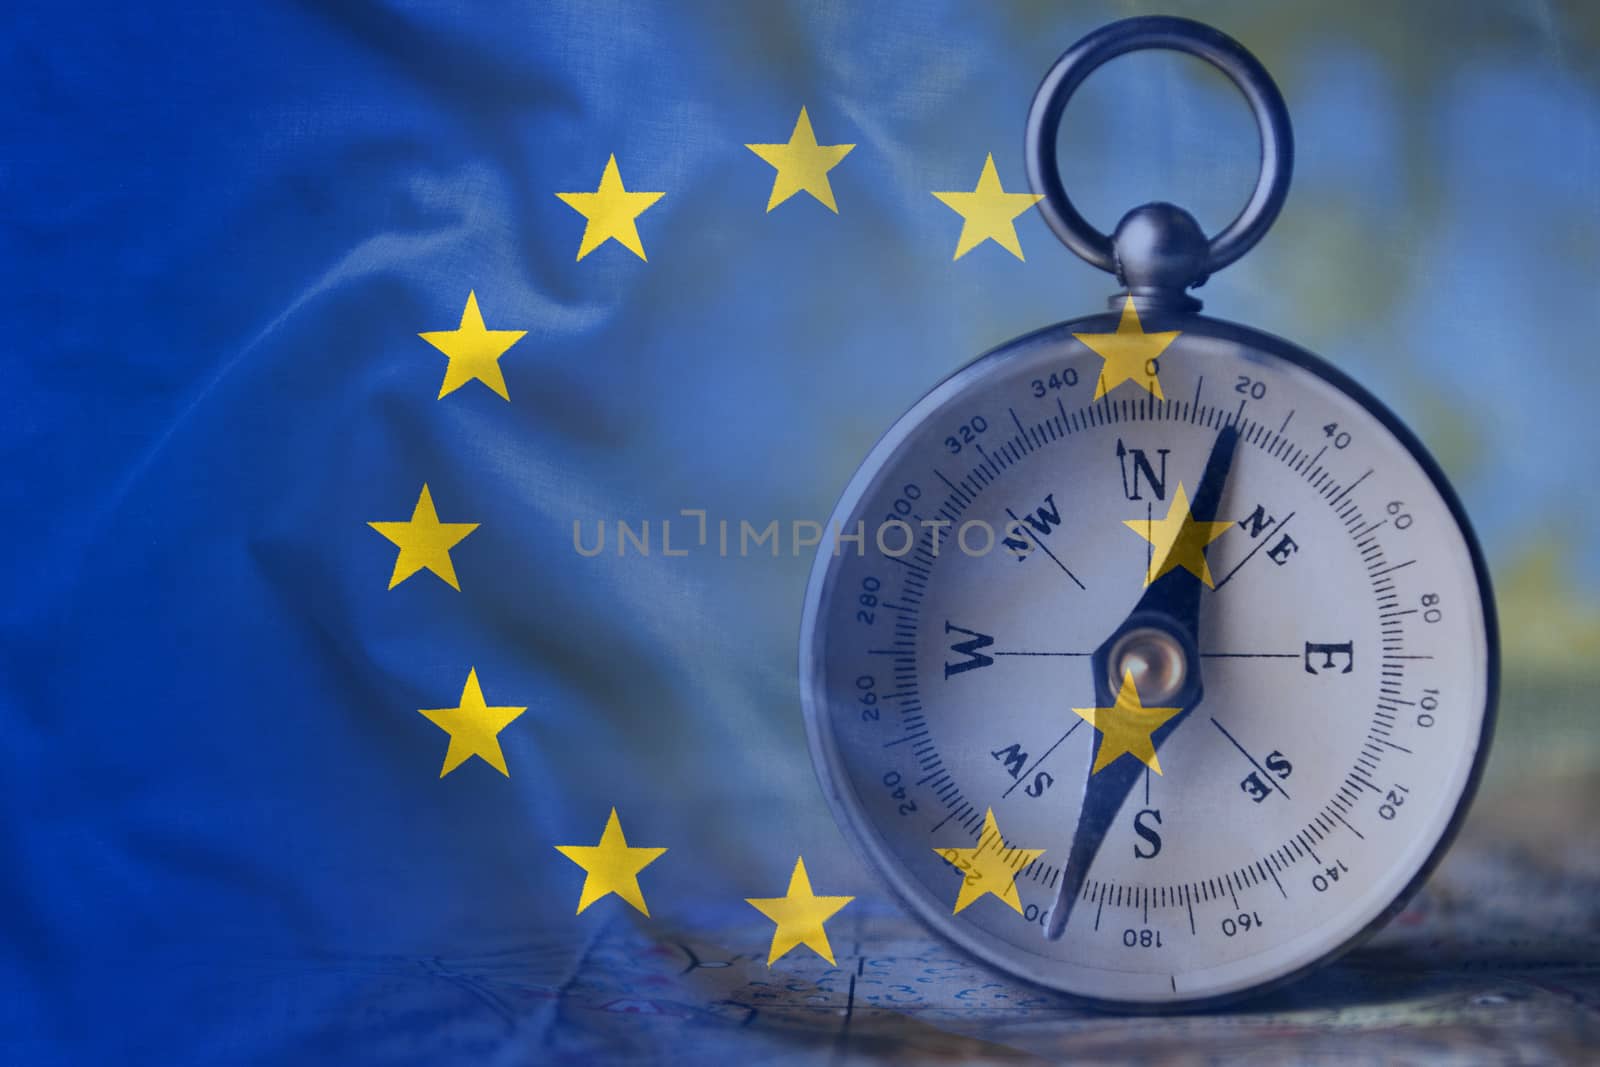 European Union flag wavy surface and classic white compass in the background. Full frame wallpaper or background concept